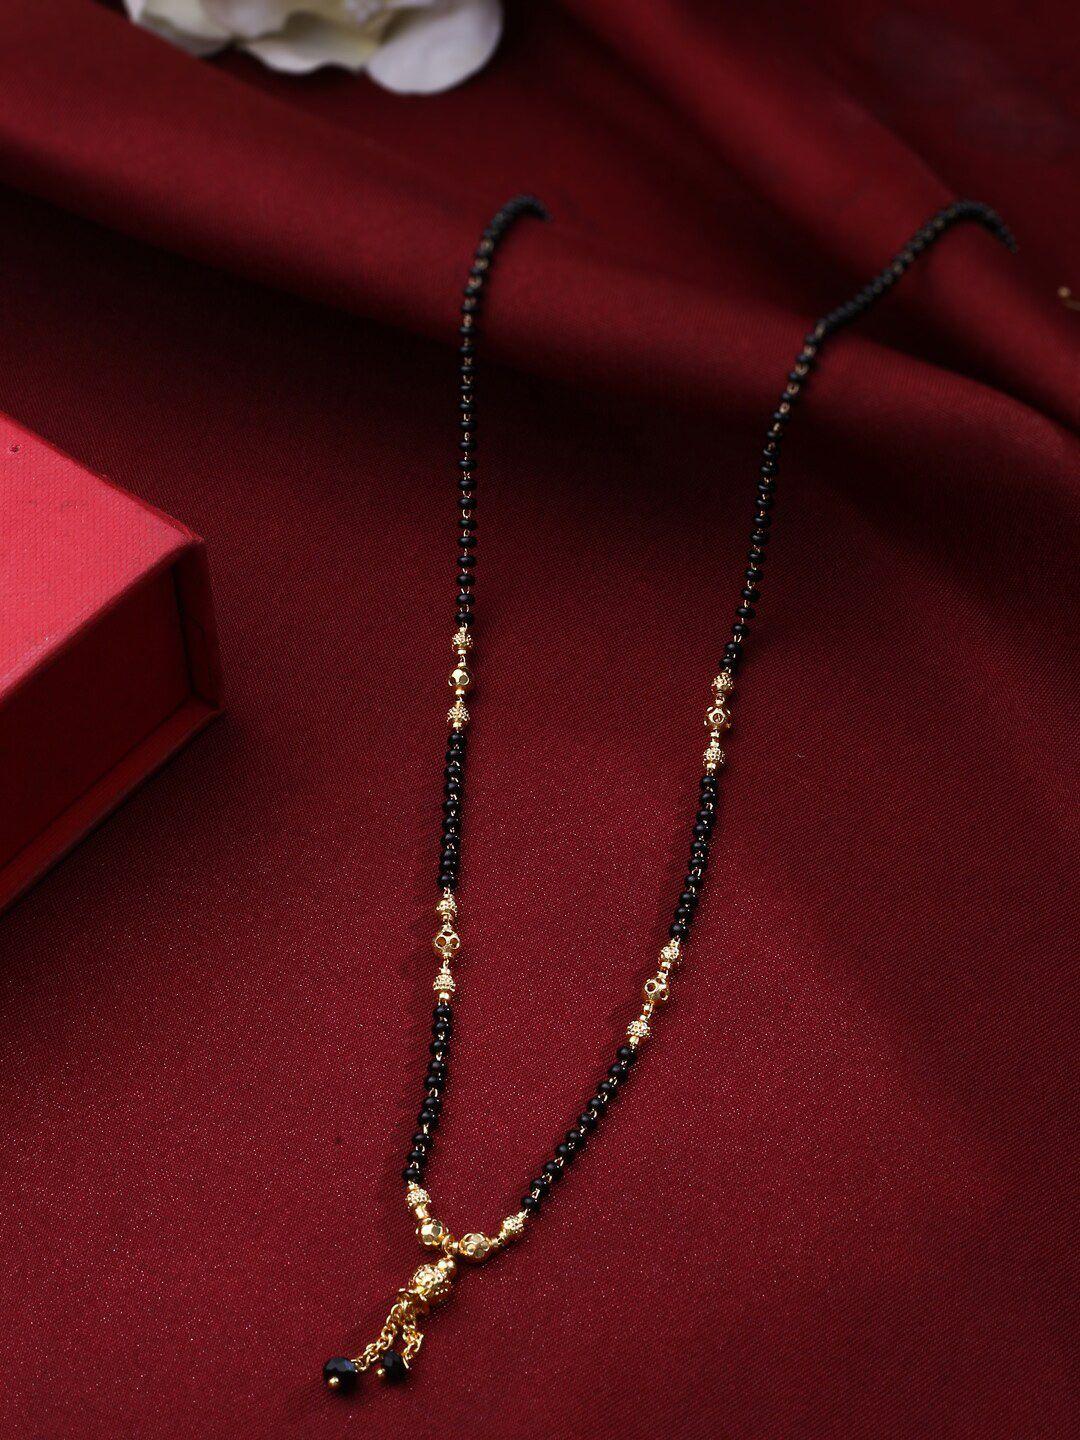 nvr gold-plated black beaded mangalsutra